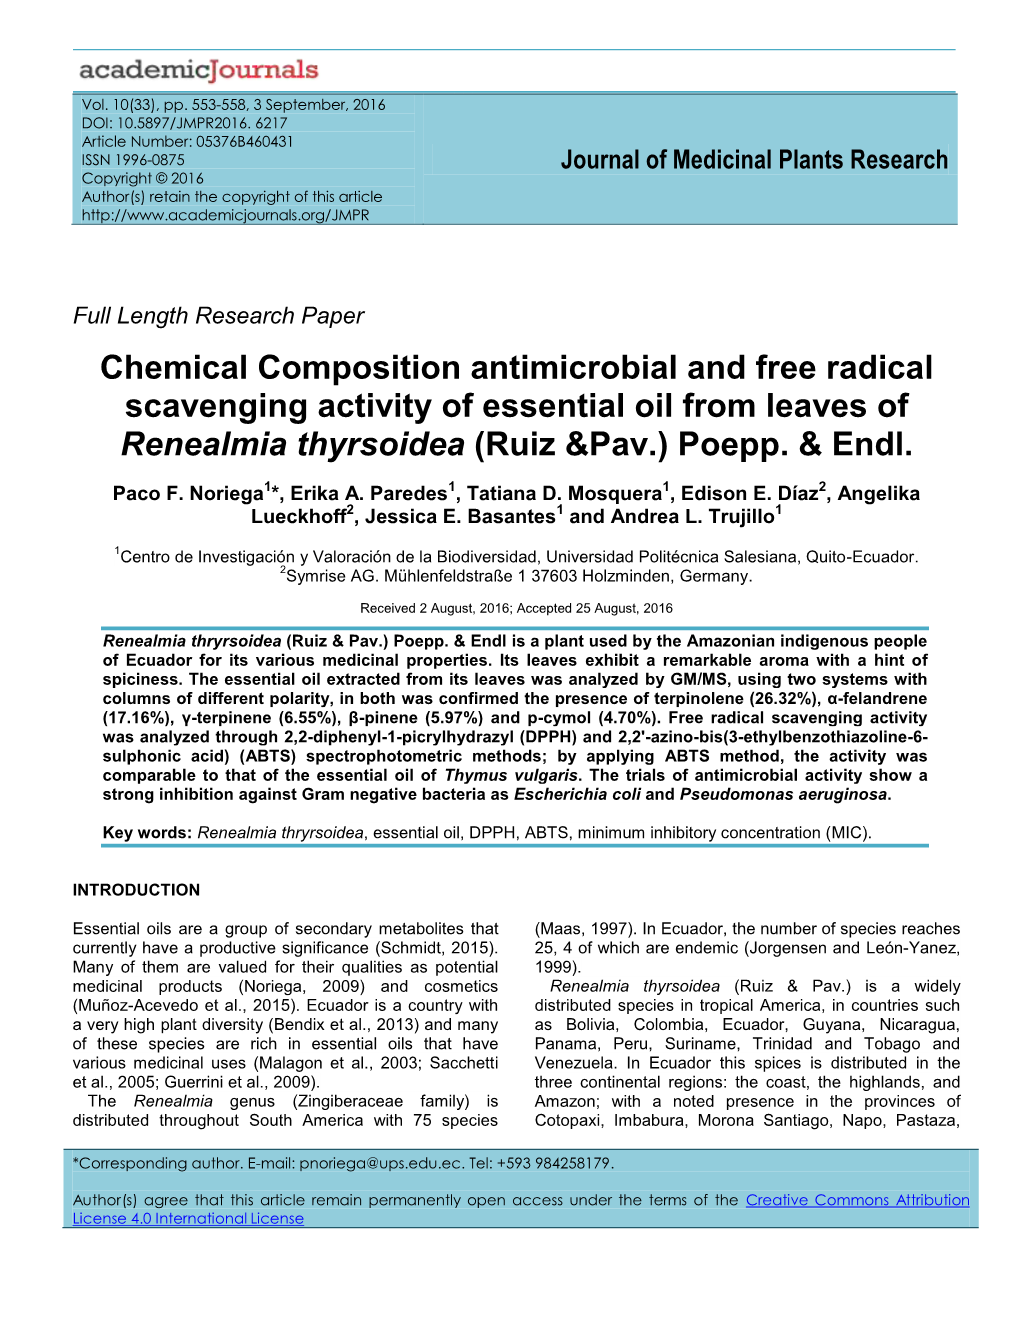 Chemical Composition Antimicrobial and Free Radical Scavenging Activity of Essential Oil from Leaves of Renealmia Thyrsoidea (Ruiz &Pav.) Poepp